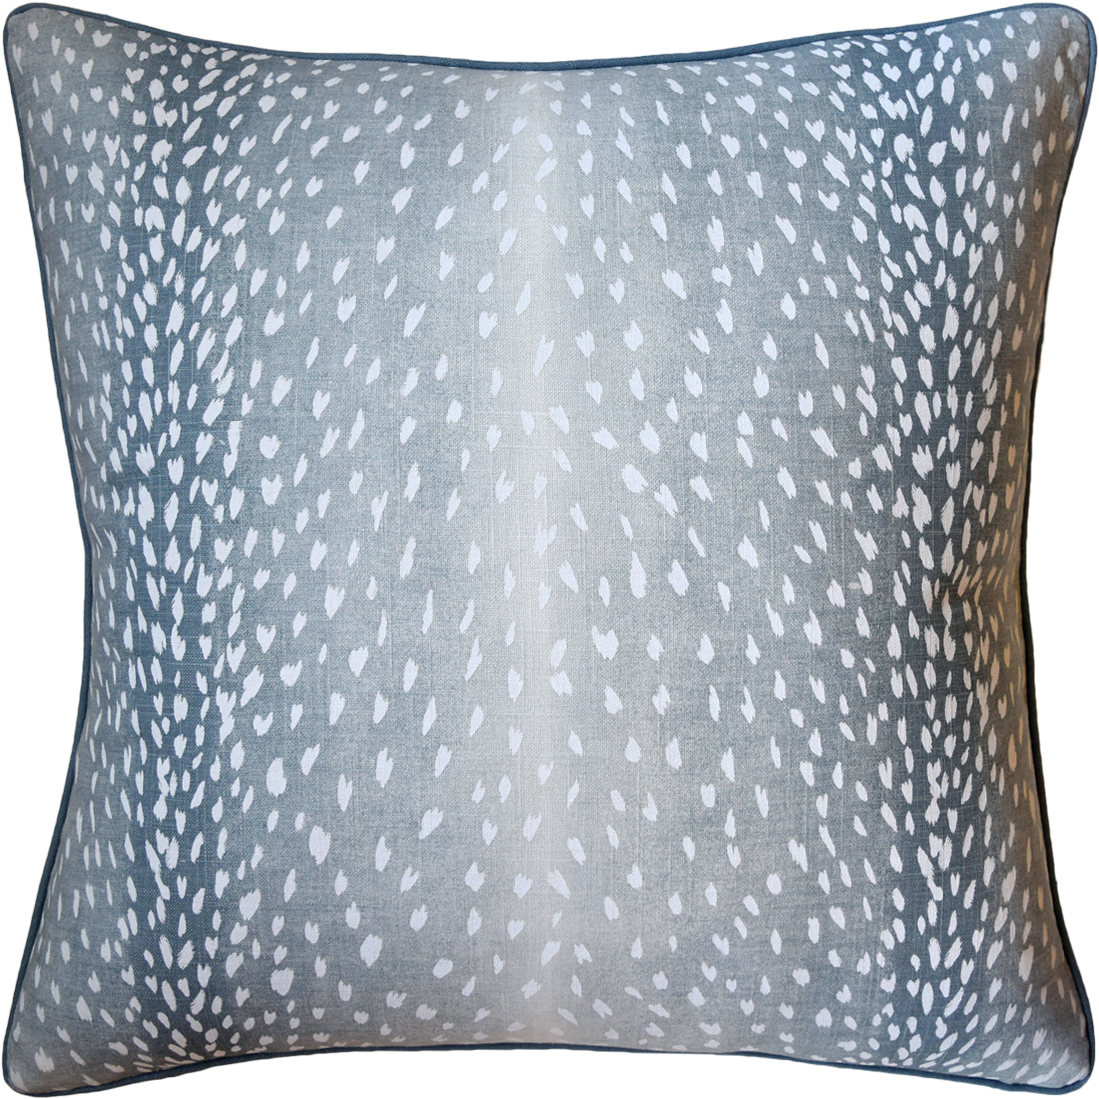 the doe pillow, a softly patterned rustic home decor piece